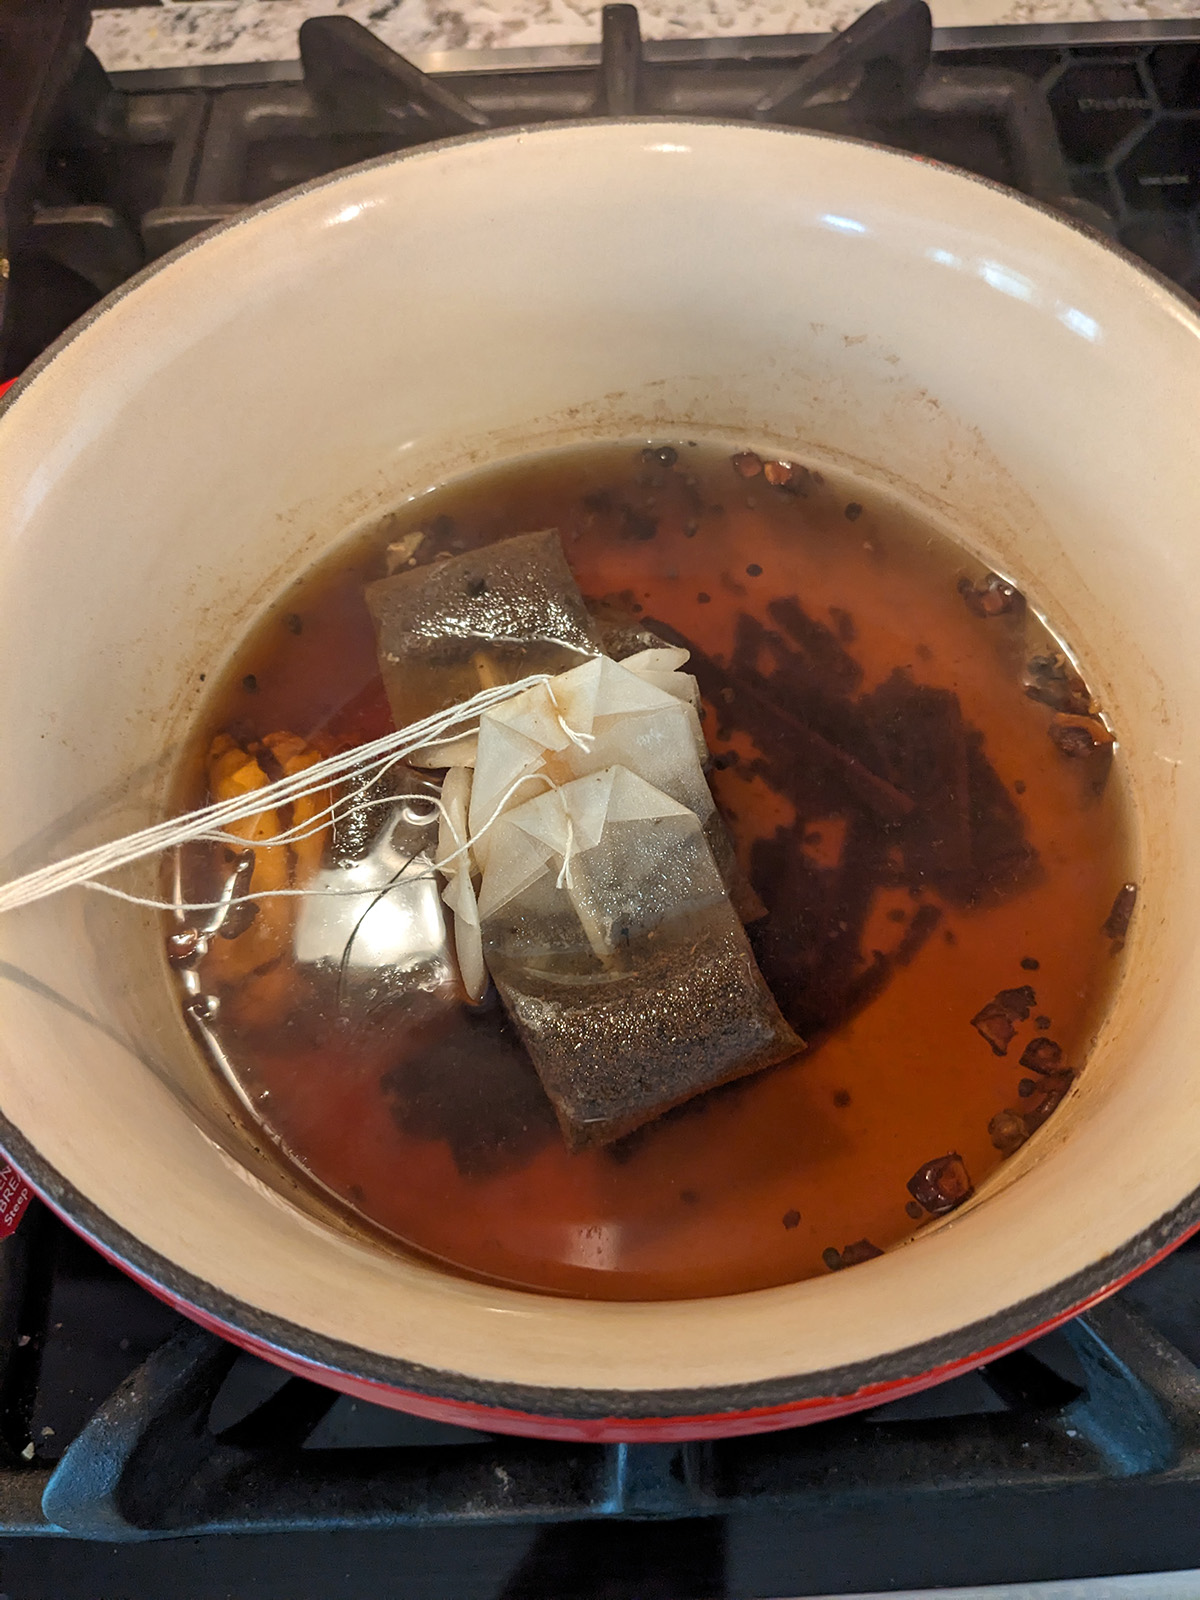 spices and tea bags simmering in water.